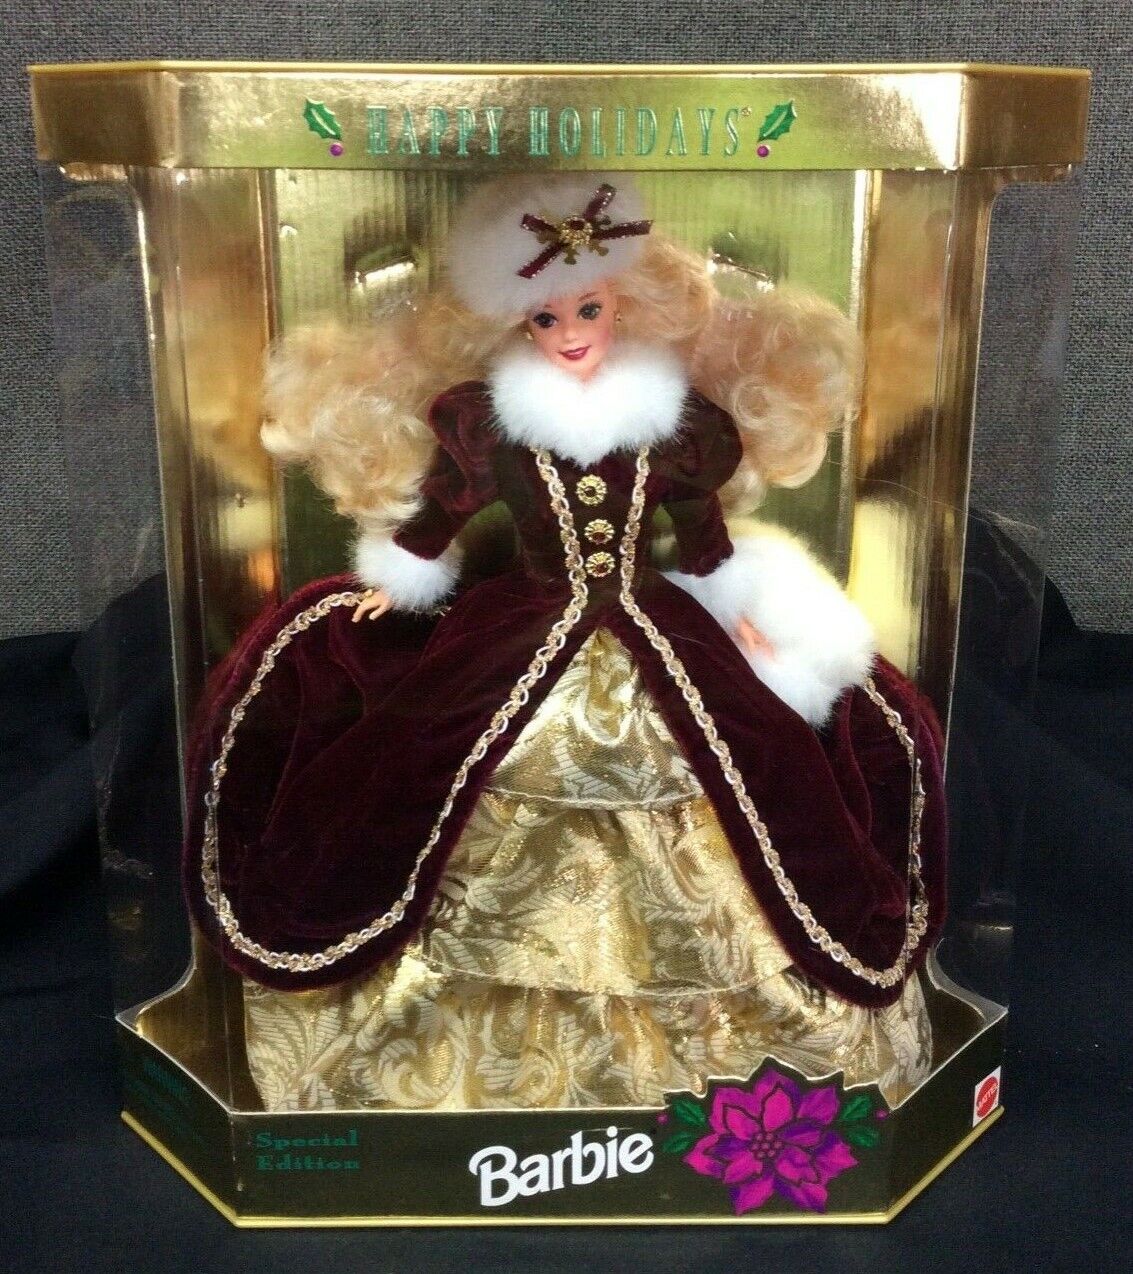 Happy Holidays 1996 Barbie Doll for sale online 